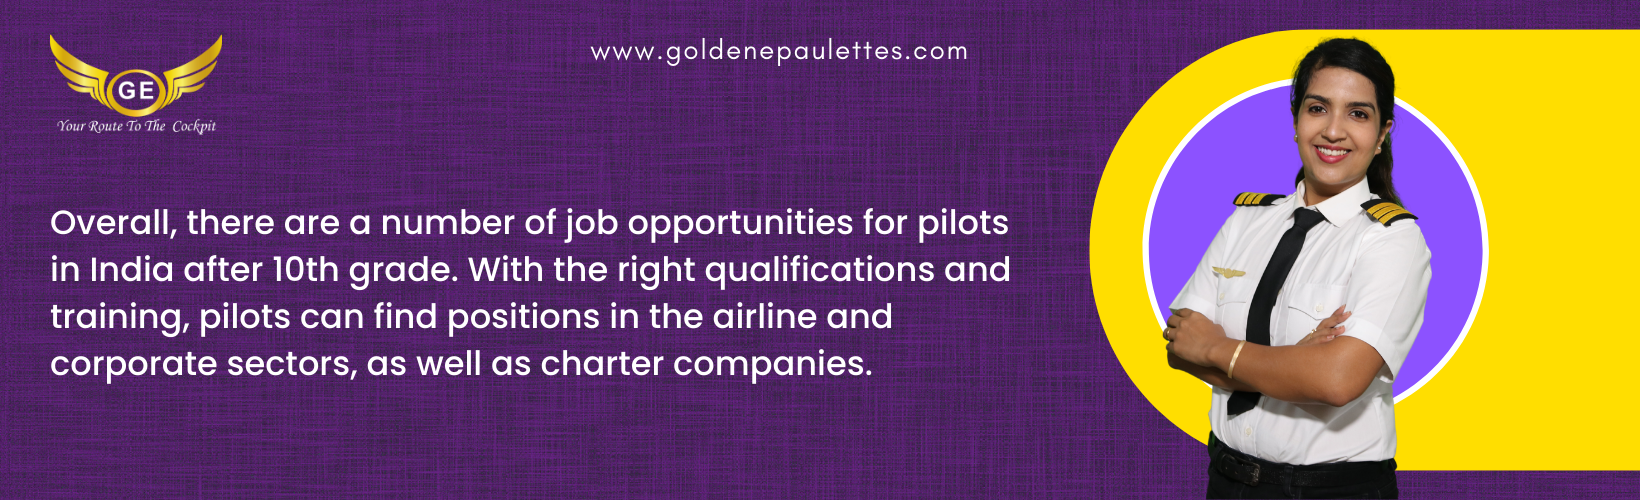 What Are the Job Opportunities for Pilots in India After 10th Grade